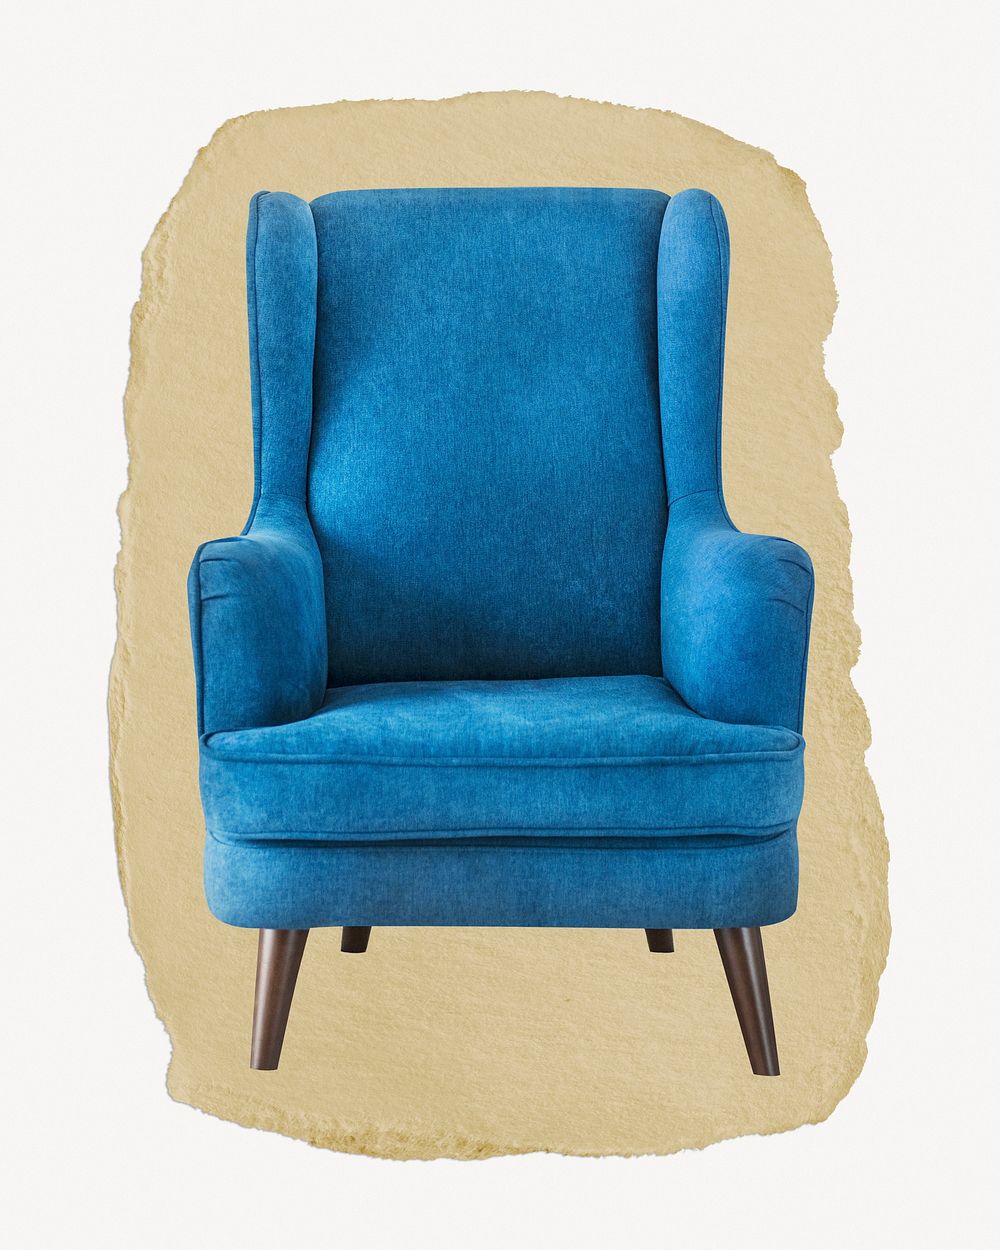 Retro armchair ripped paper, furniture graphic